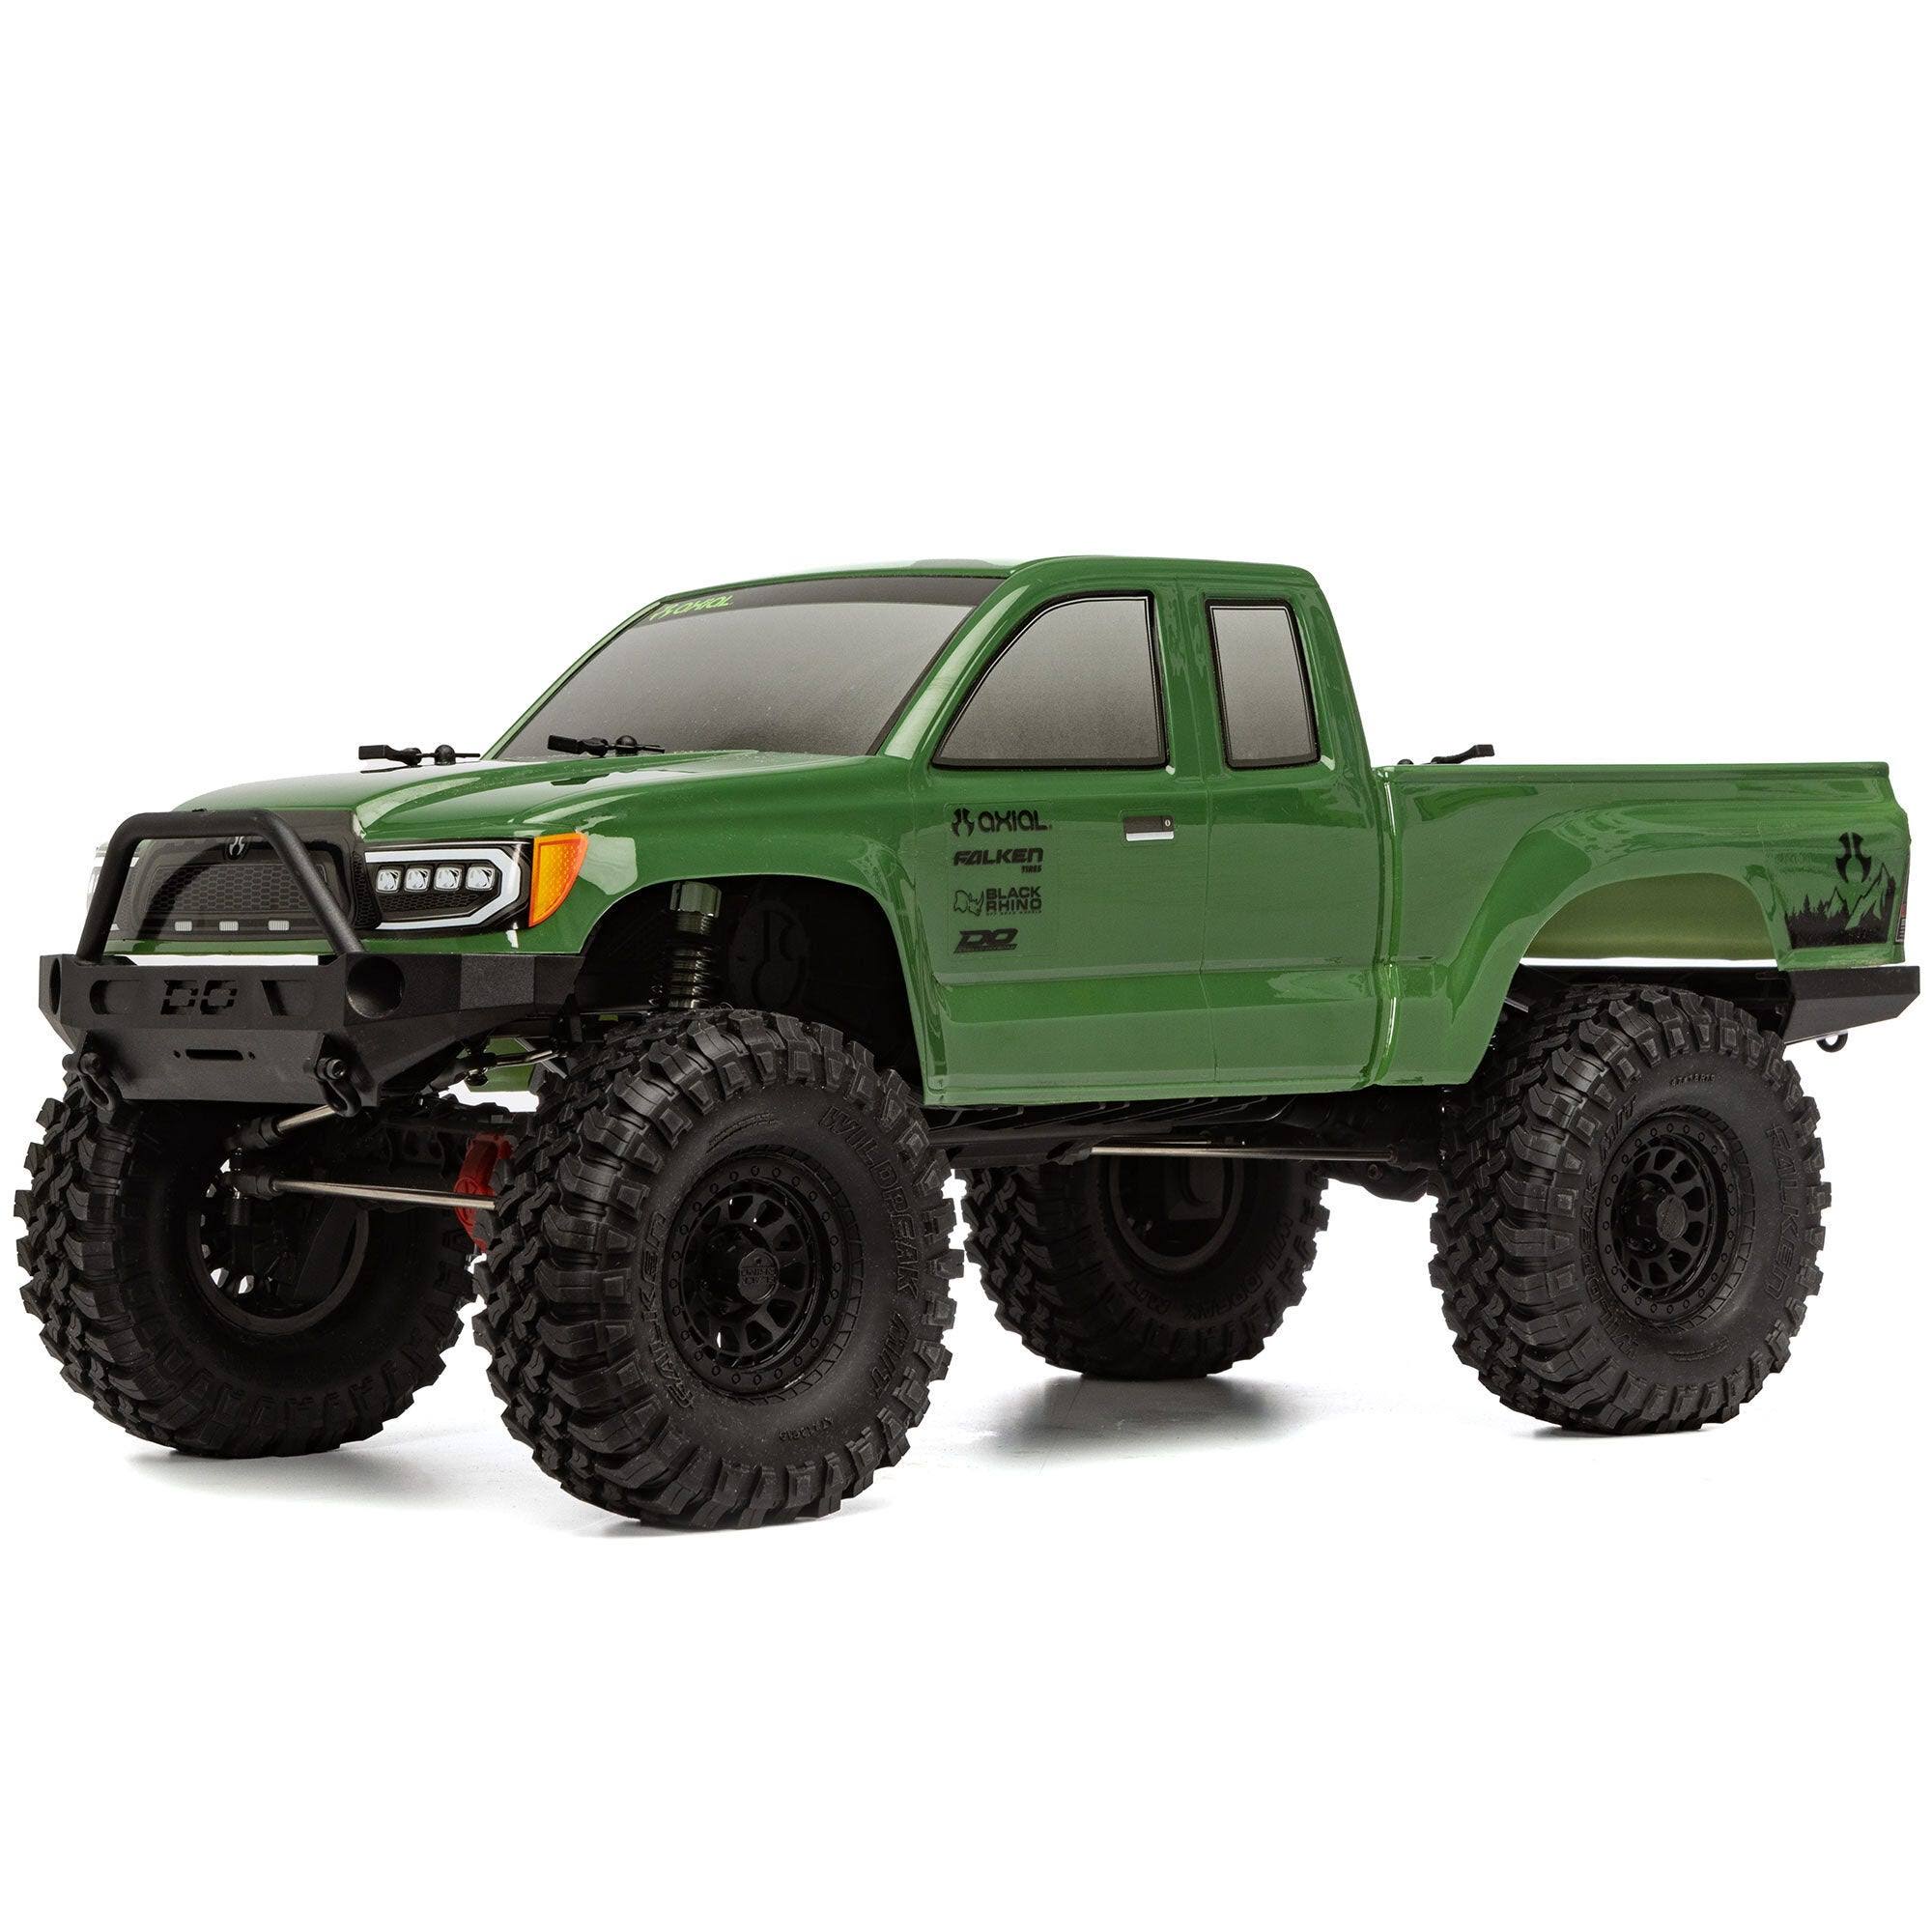 AXIAL RC Truck 1/10 SCX10 III Base Camp 4WD Rock Crawler Brushed RTR (Batteries and Charger Not Included), Green, AXI03027T2